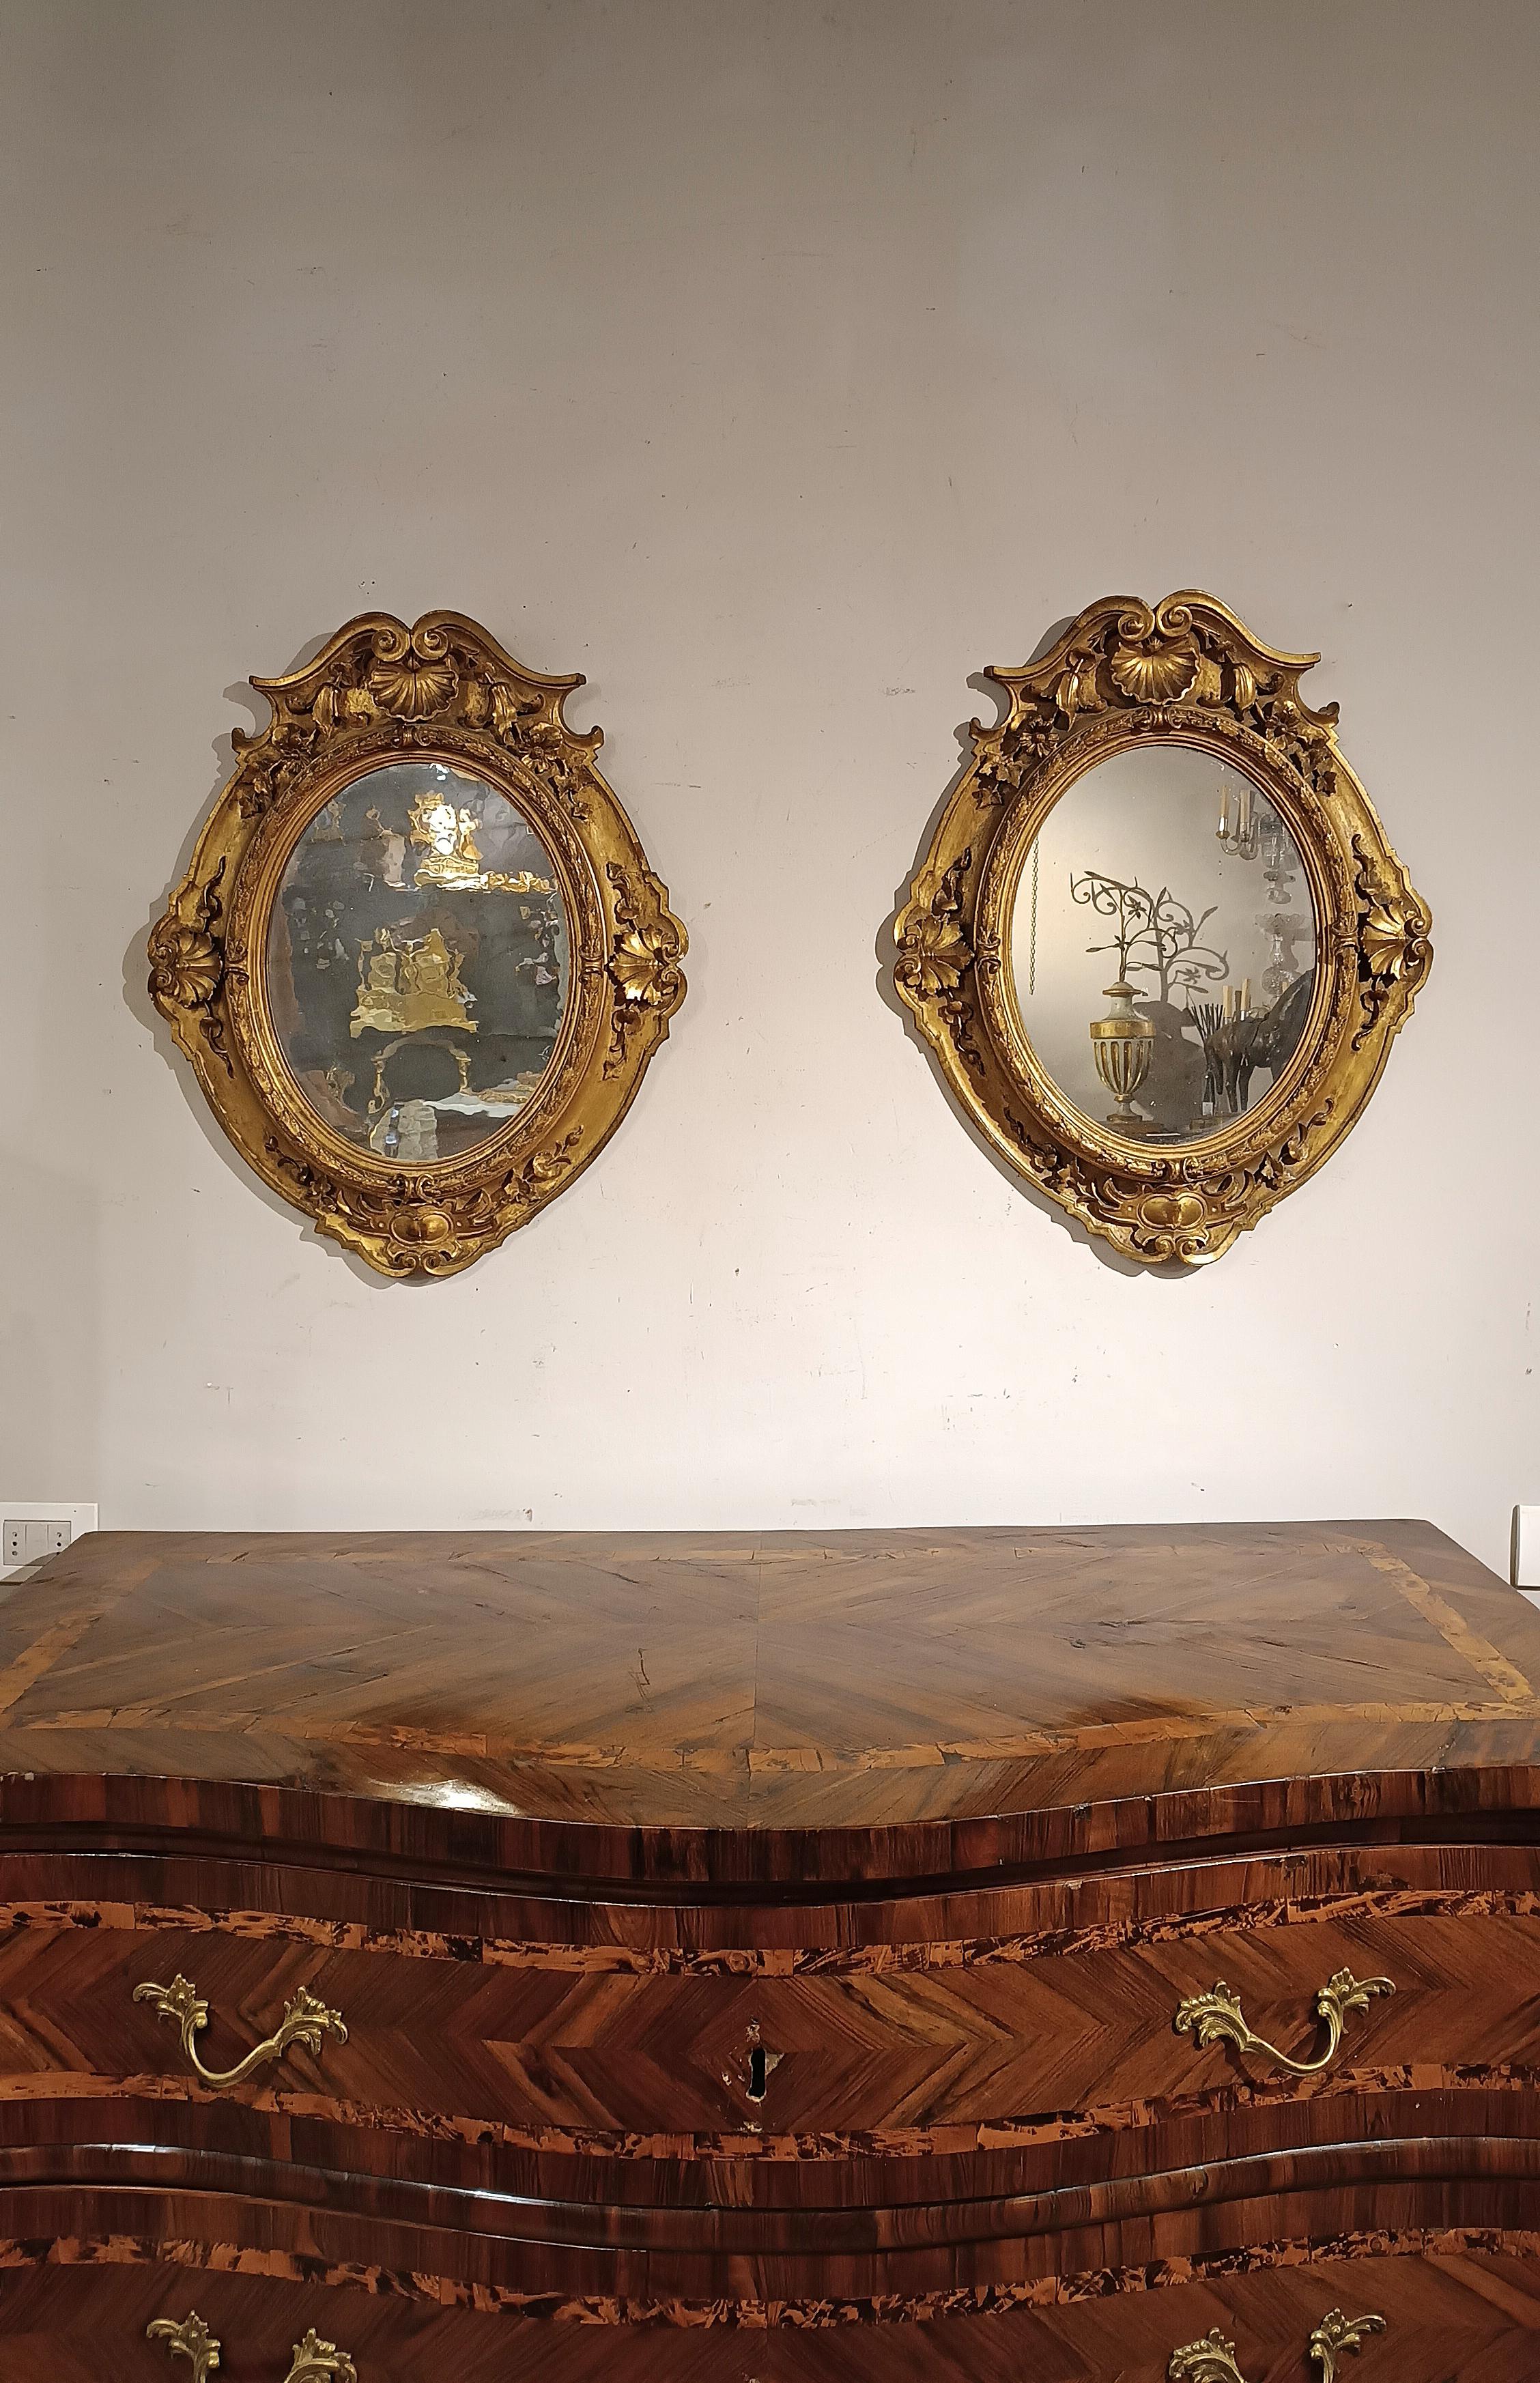 Beautiful and elegant pair of oval mirrors in carved and gilded pine wood with pure gold leaf, which adds a touch of opulence and refinement to them. The decoration includes shells and phytomorphic elements, creating a fascinating and unique design.